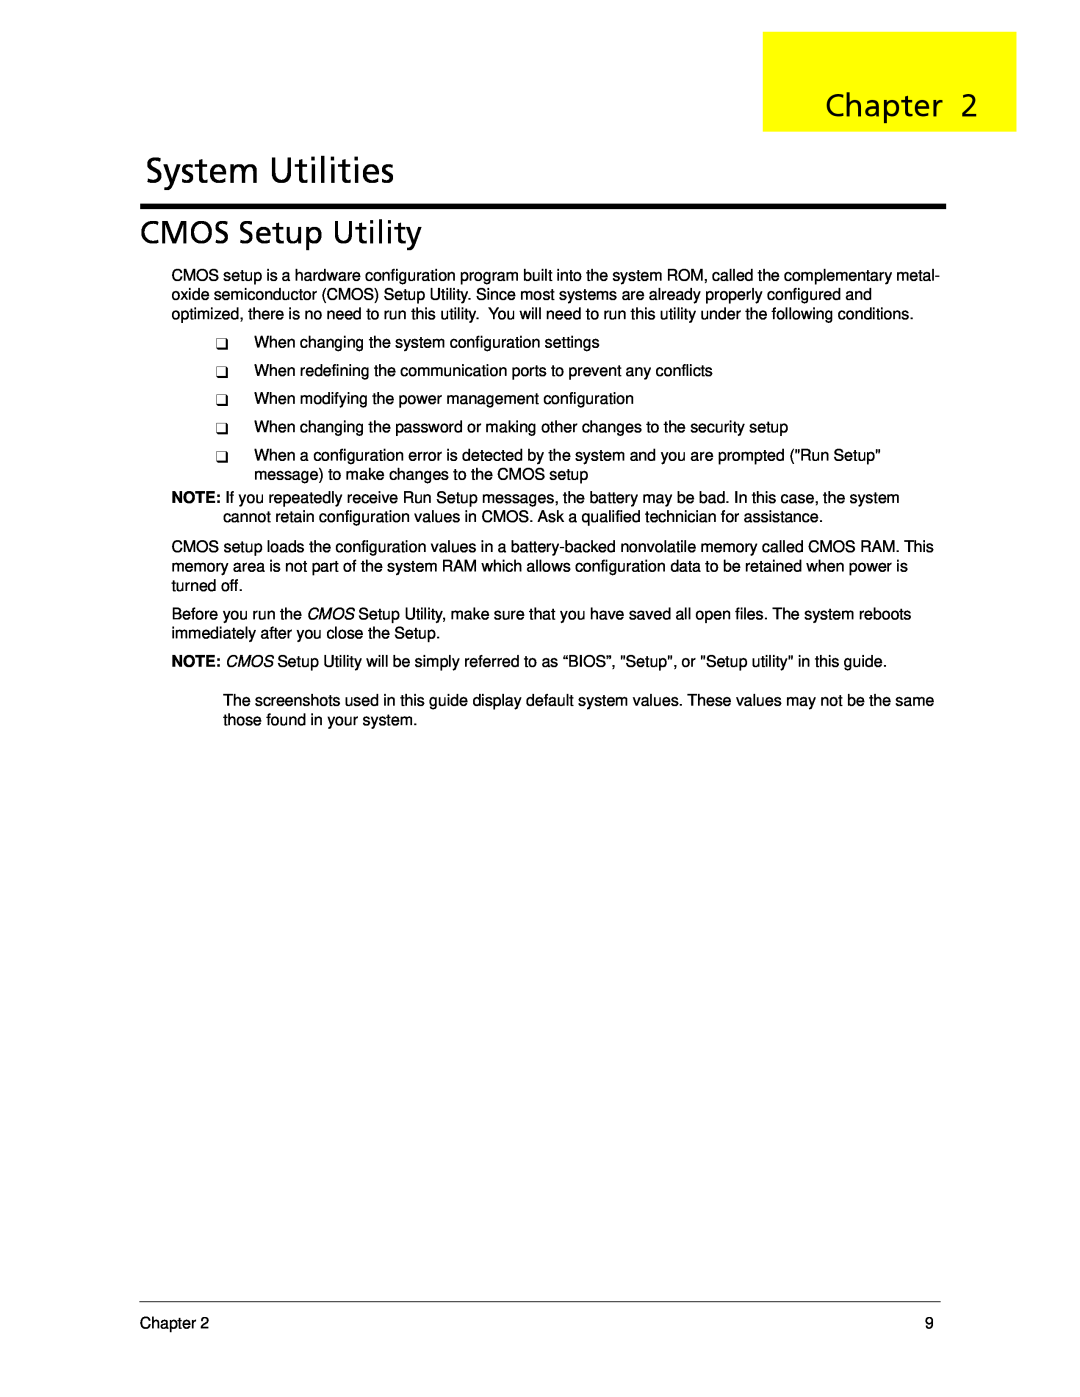 Acer X5300, X3300 manual System Utilities, CMOS Setup Utility, Chapter 